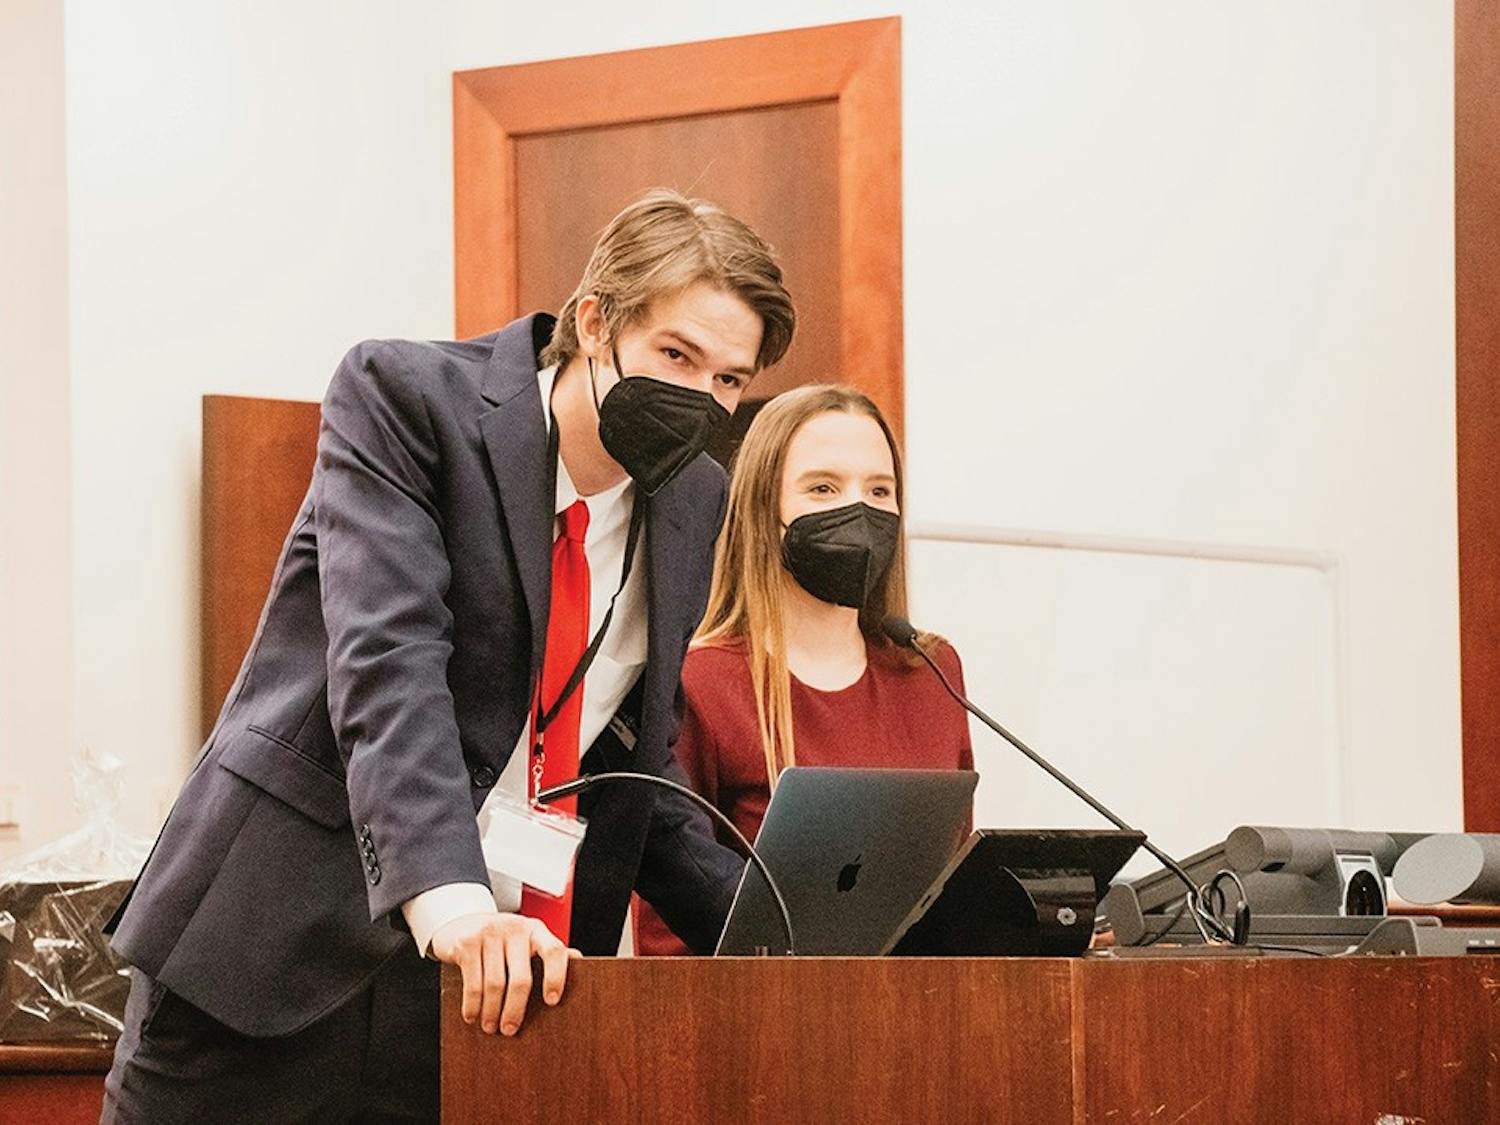 Third-year accounting student and Mock Trial President Ben Wallace speaks to the courtroom during USC’s Soda City Trials.